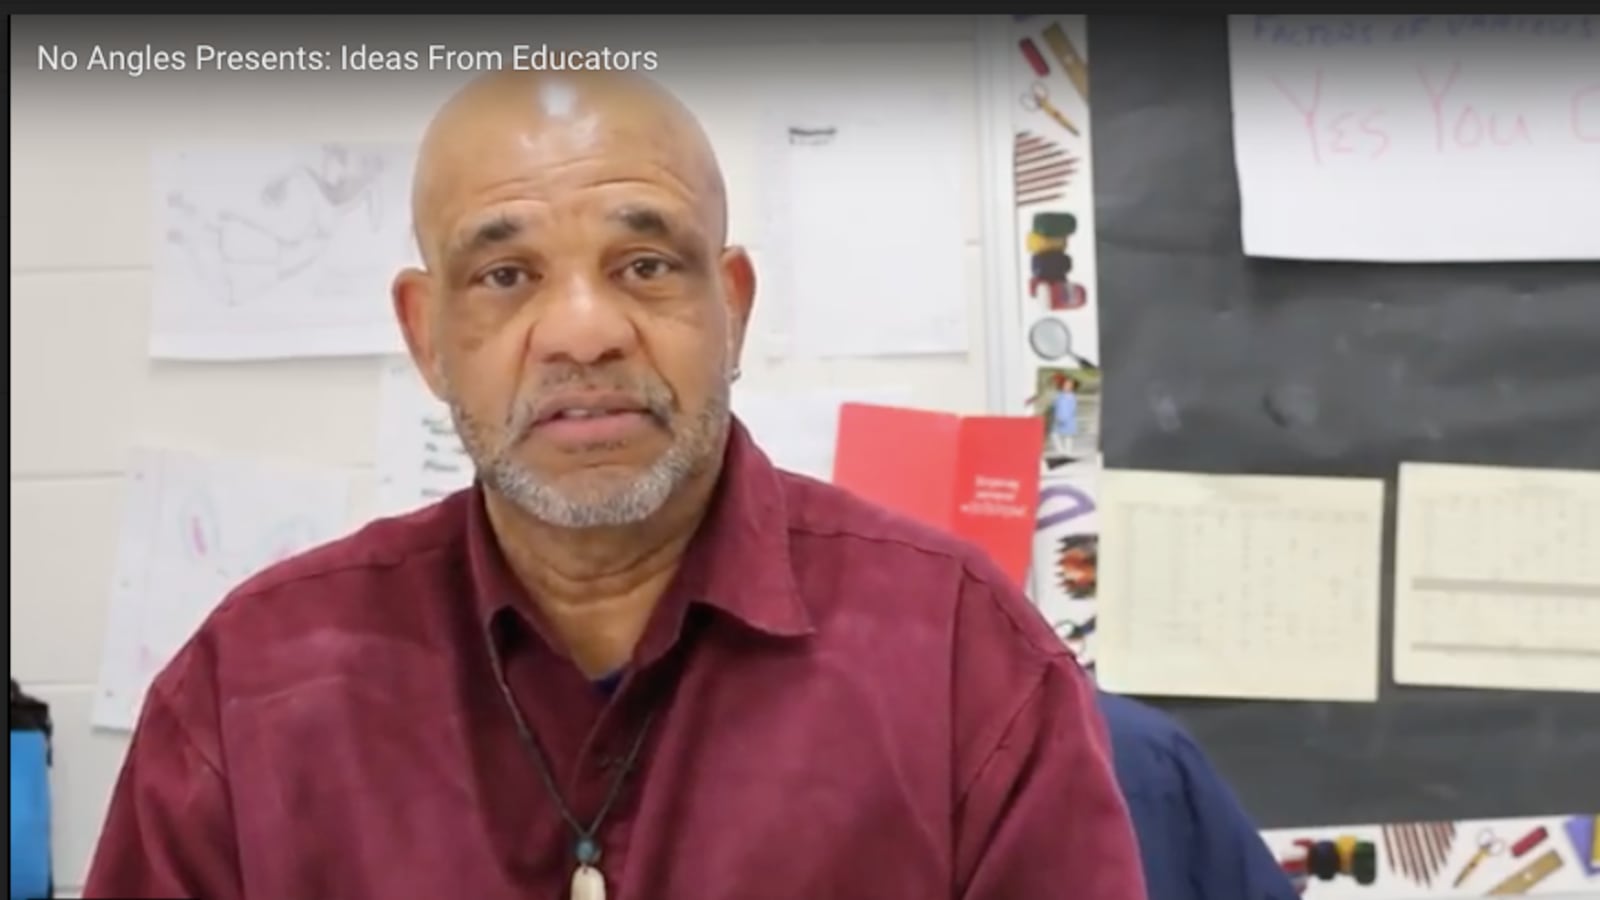 A new video called "Ideas from Educators" invites Detroit teachers to share suggestions for what they would change about education.